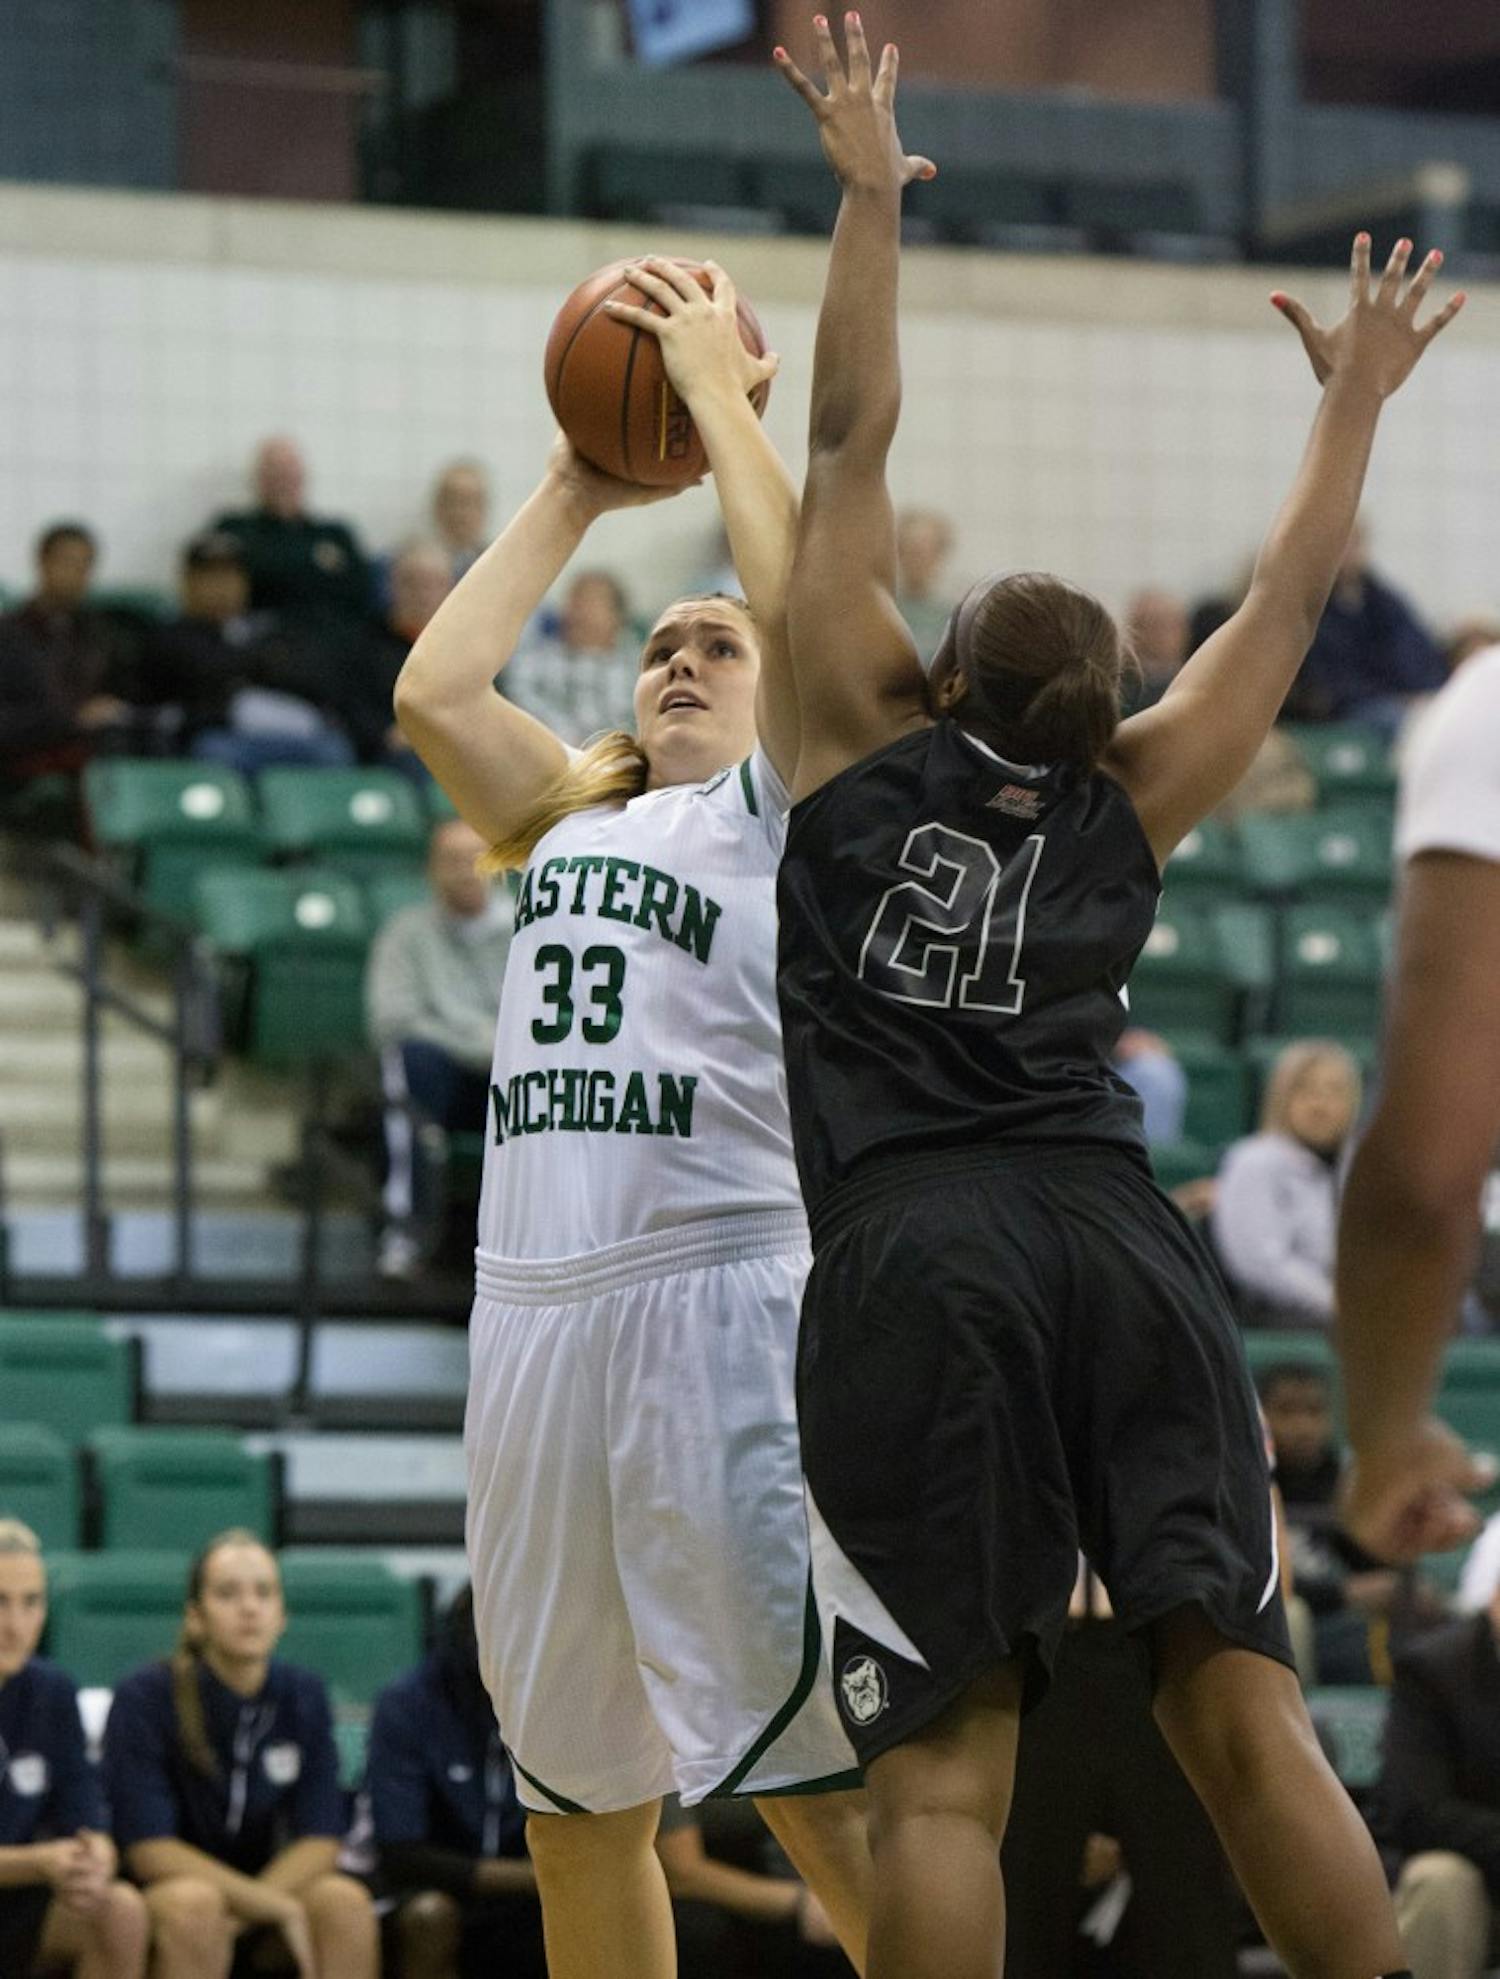 EMU forward Olivia Fouty had a double-double in last nights 81-76 overtime win over Butler.(33) had a double-double in last nights 81-76 overtime win over Butler.